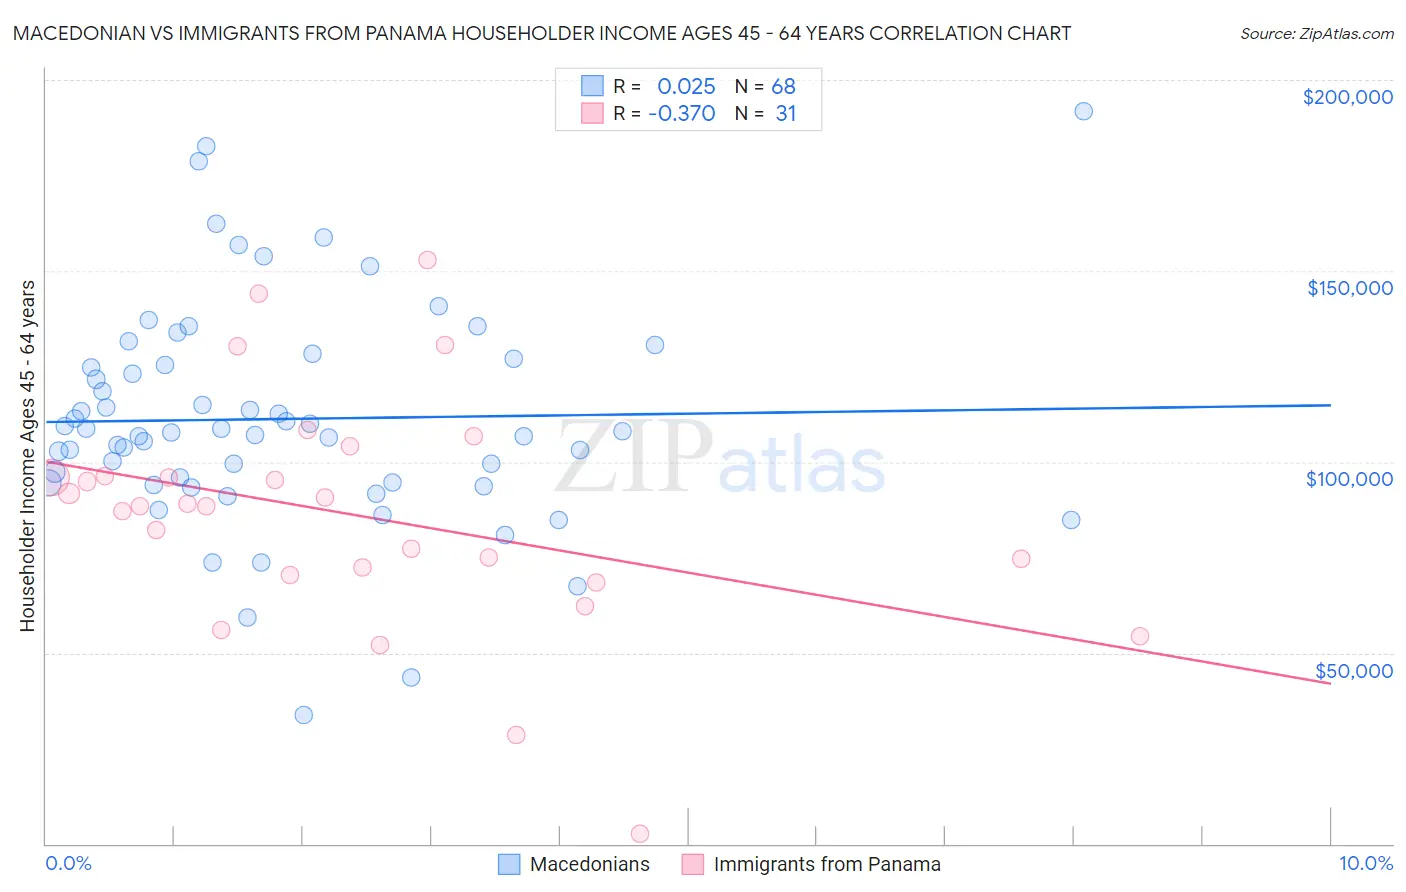 Macedonian vs Immigrants from Panama Householder Income Ages 45 - 64 years